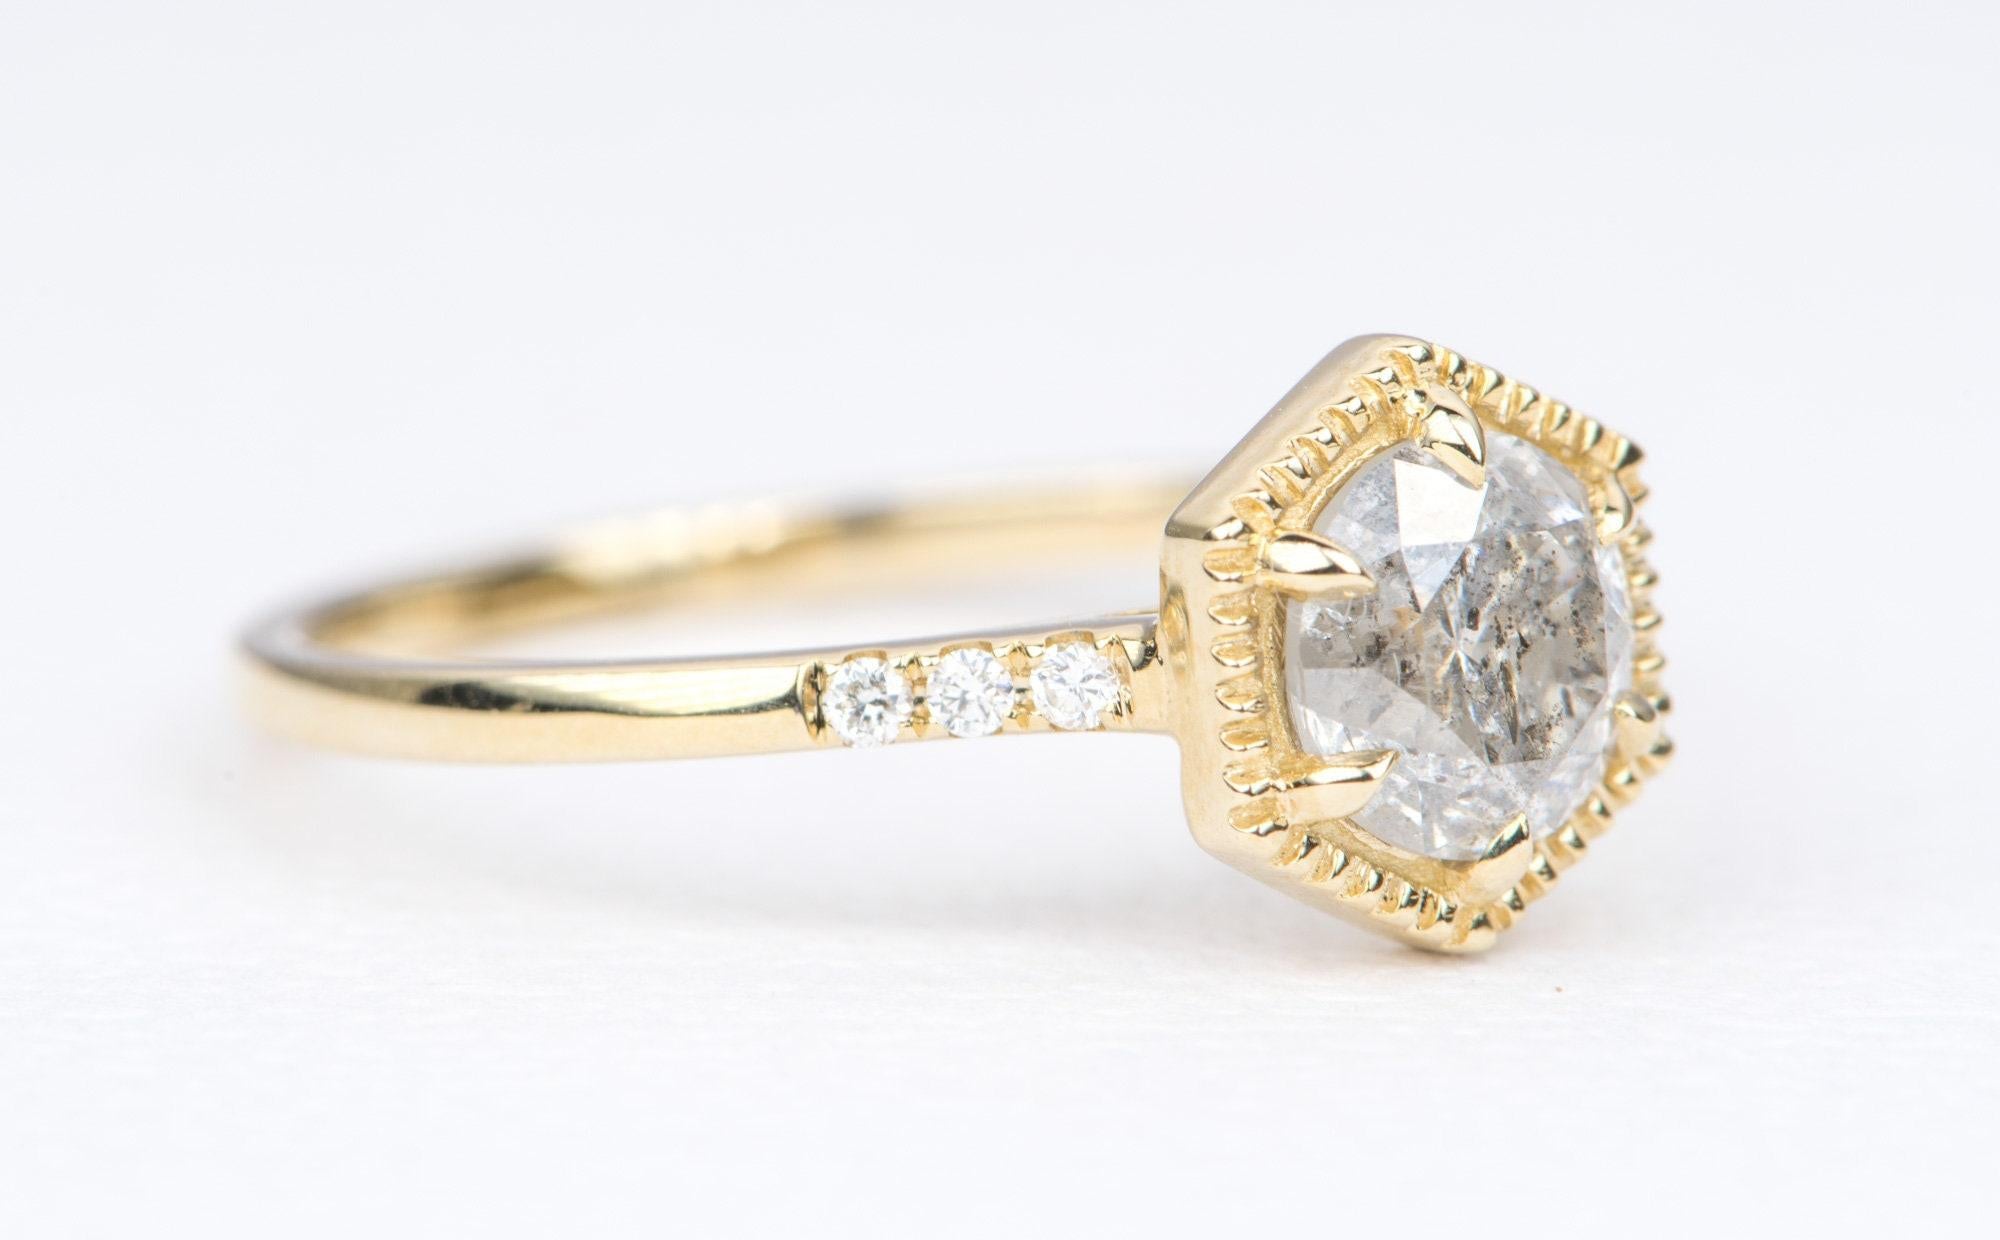 ♥  Solid 14K yellow gold ring set with a hexagon shaped round brilliant cut salt & pepper diamond in the center
♥  A milgrain edge setting surrounds the main stone and a trip of diamonds accent the band on each side
♥  The overall setting measures